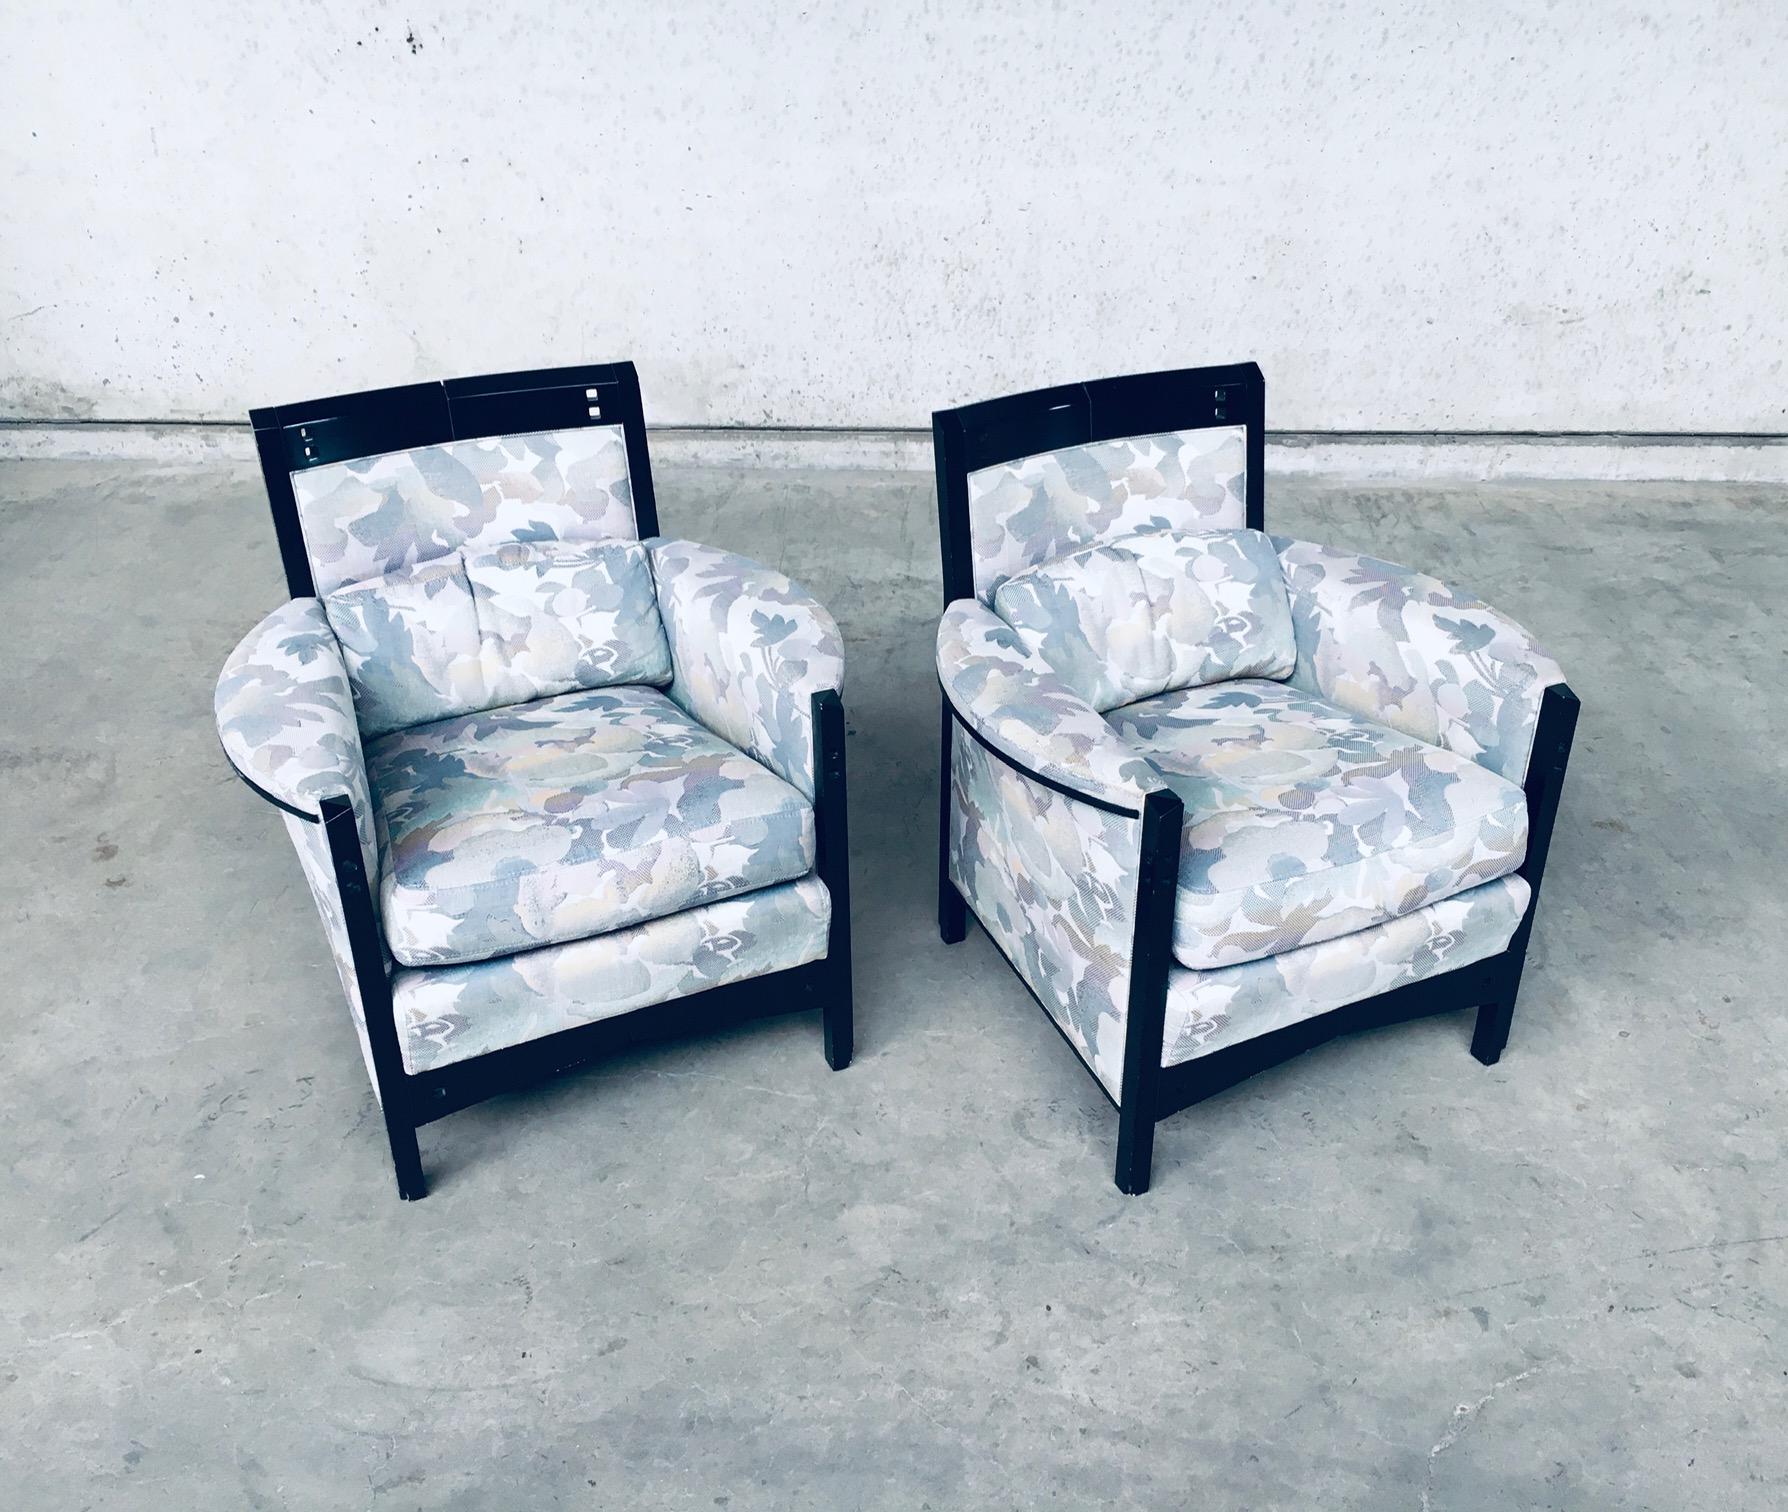 Postmodern Italian Design Galaxy series 'Peggy' Low Armchair set of 2 by Umberto Asnago for Giorgetti, made in Italy 1990's. Black laquered architectural frame with blueish grey green flower fabric. Superb design in very good condition. All original